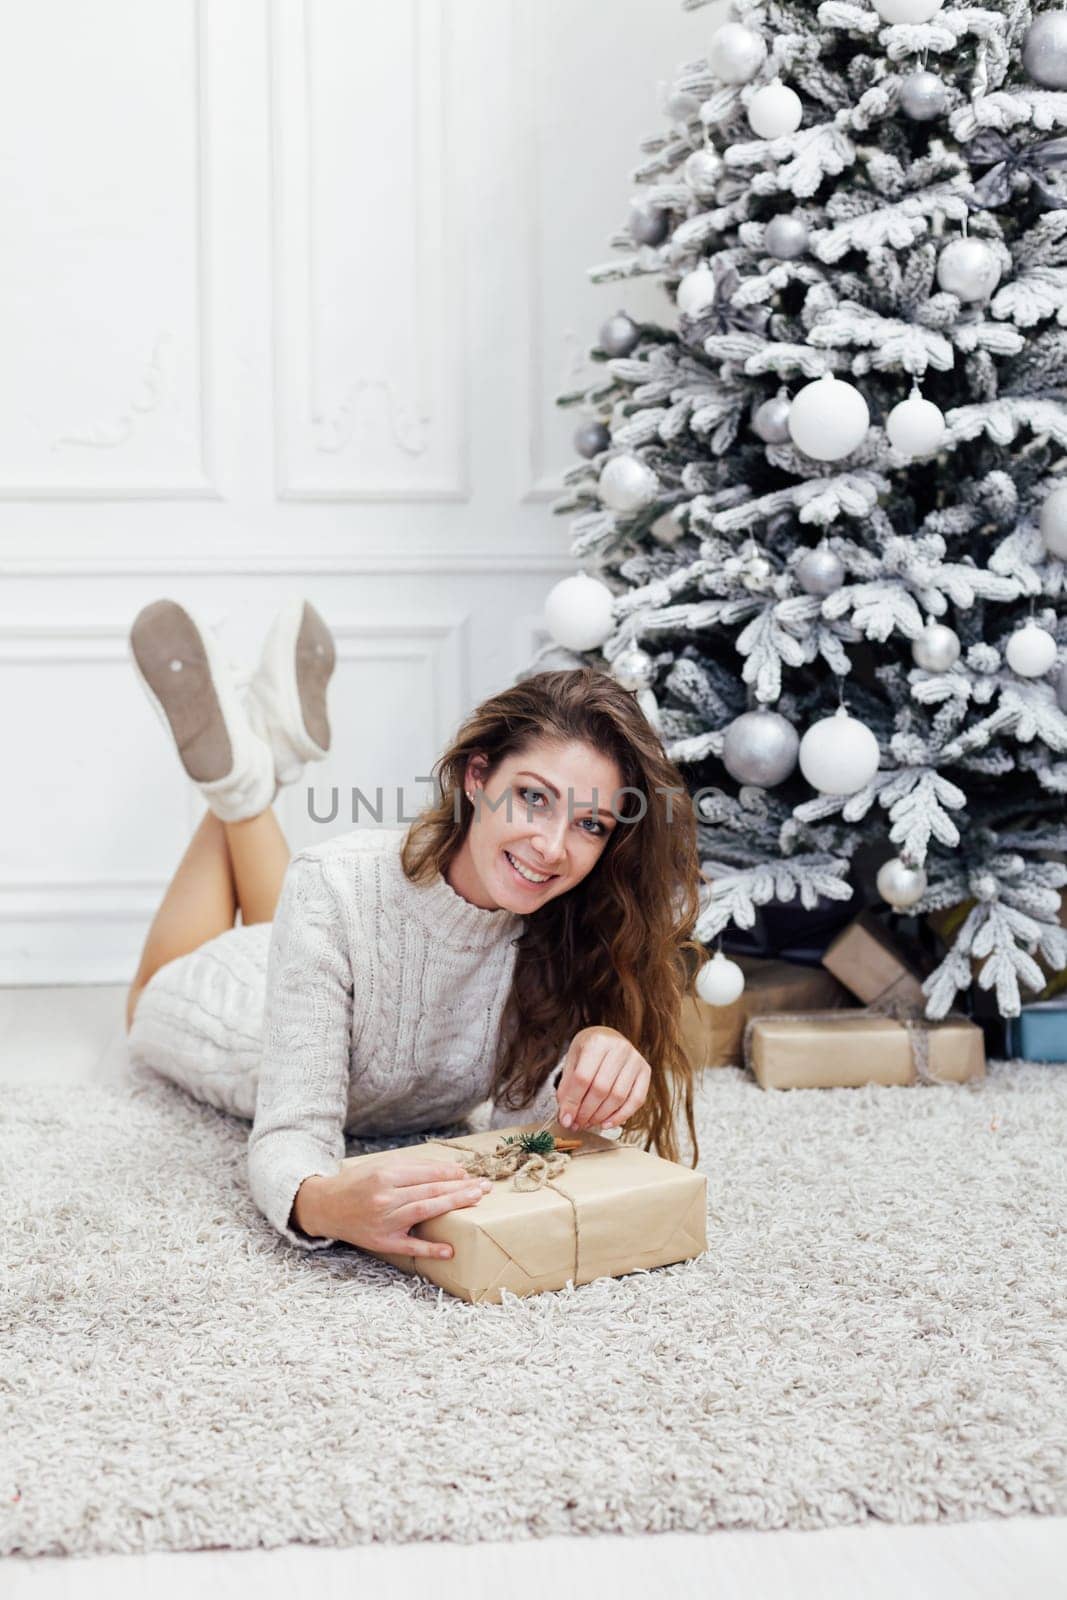 Beautiful woman decorating christmas tree with gifts for new year by Simakov